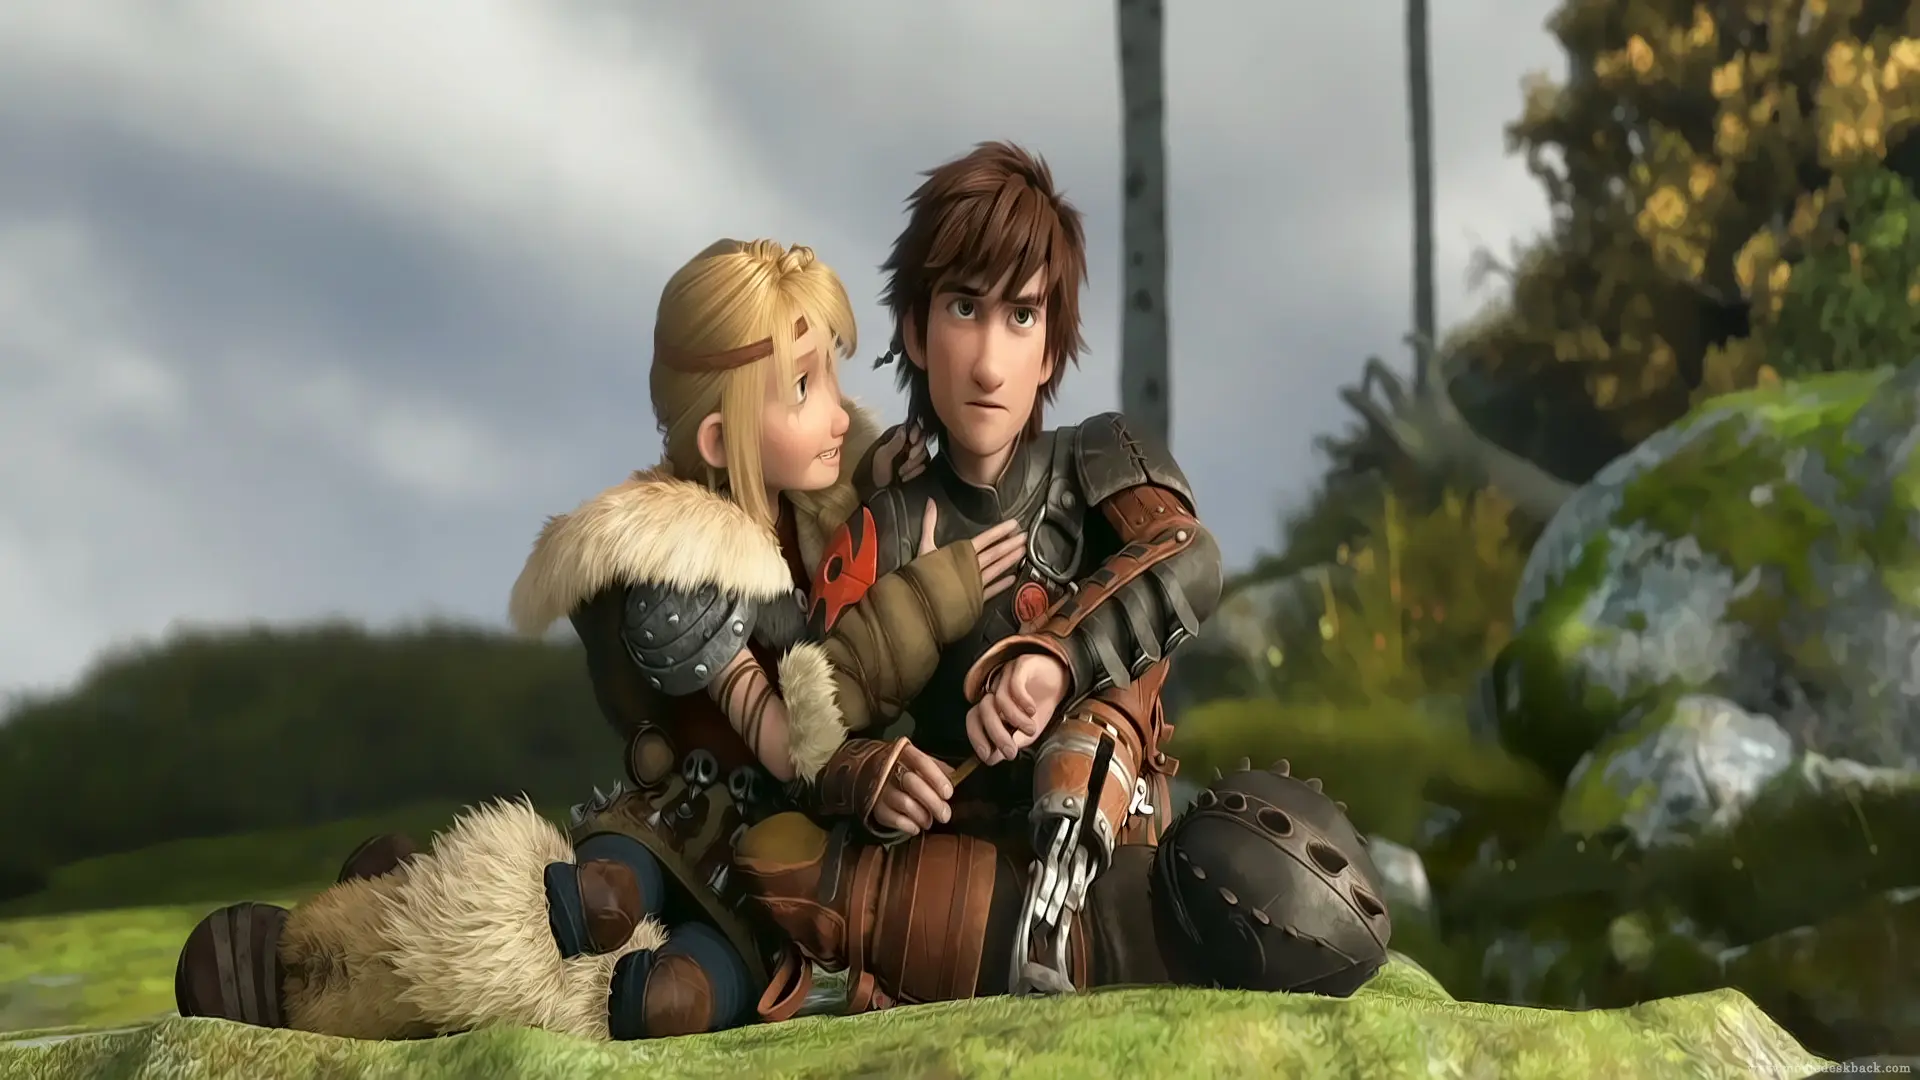 Movie How to Train Your Dragon 2 wallpaper 2 | Background Image